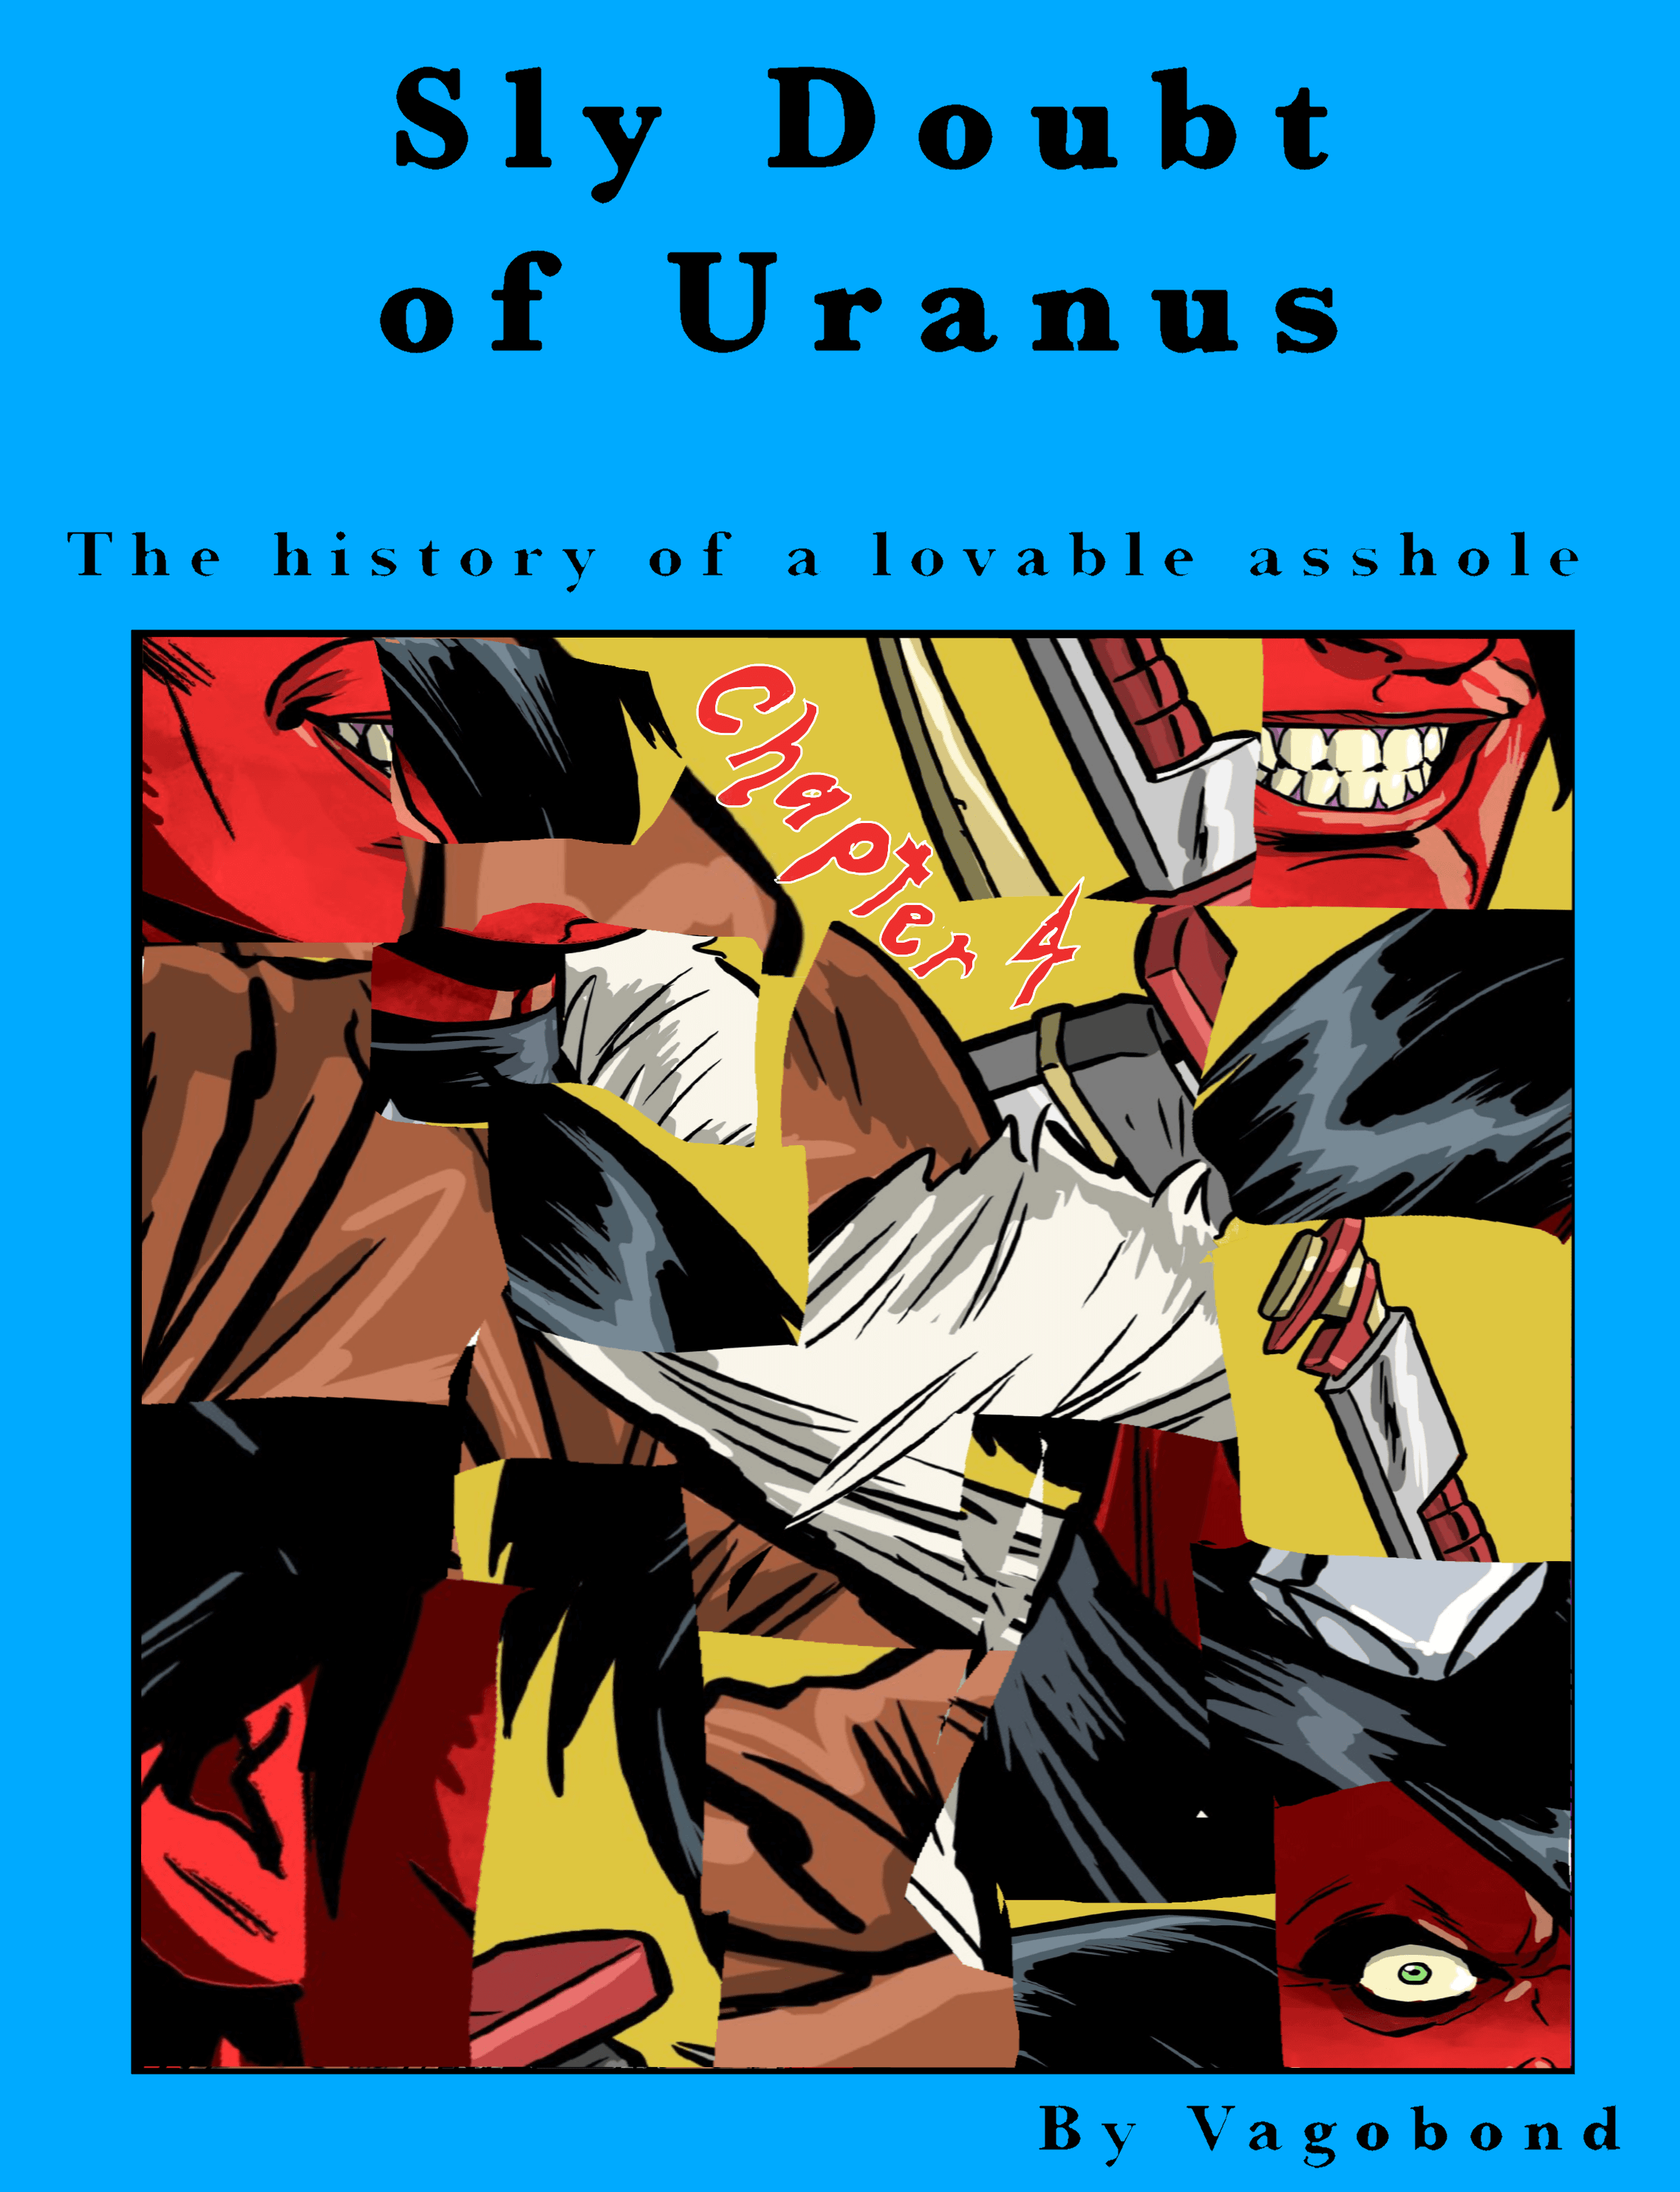 Sly Doubt of Uranus: The History of a Lovable Asshole - Chapter 4: 1st Edition 